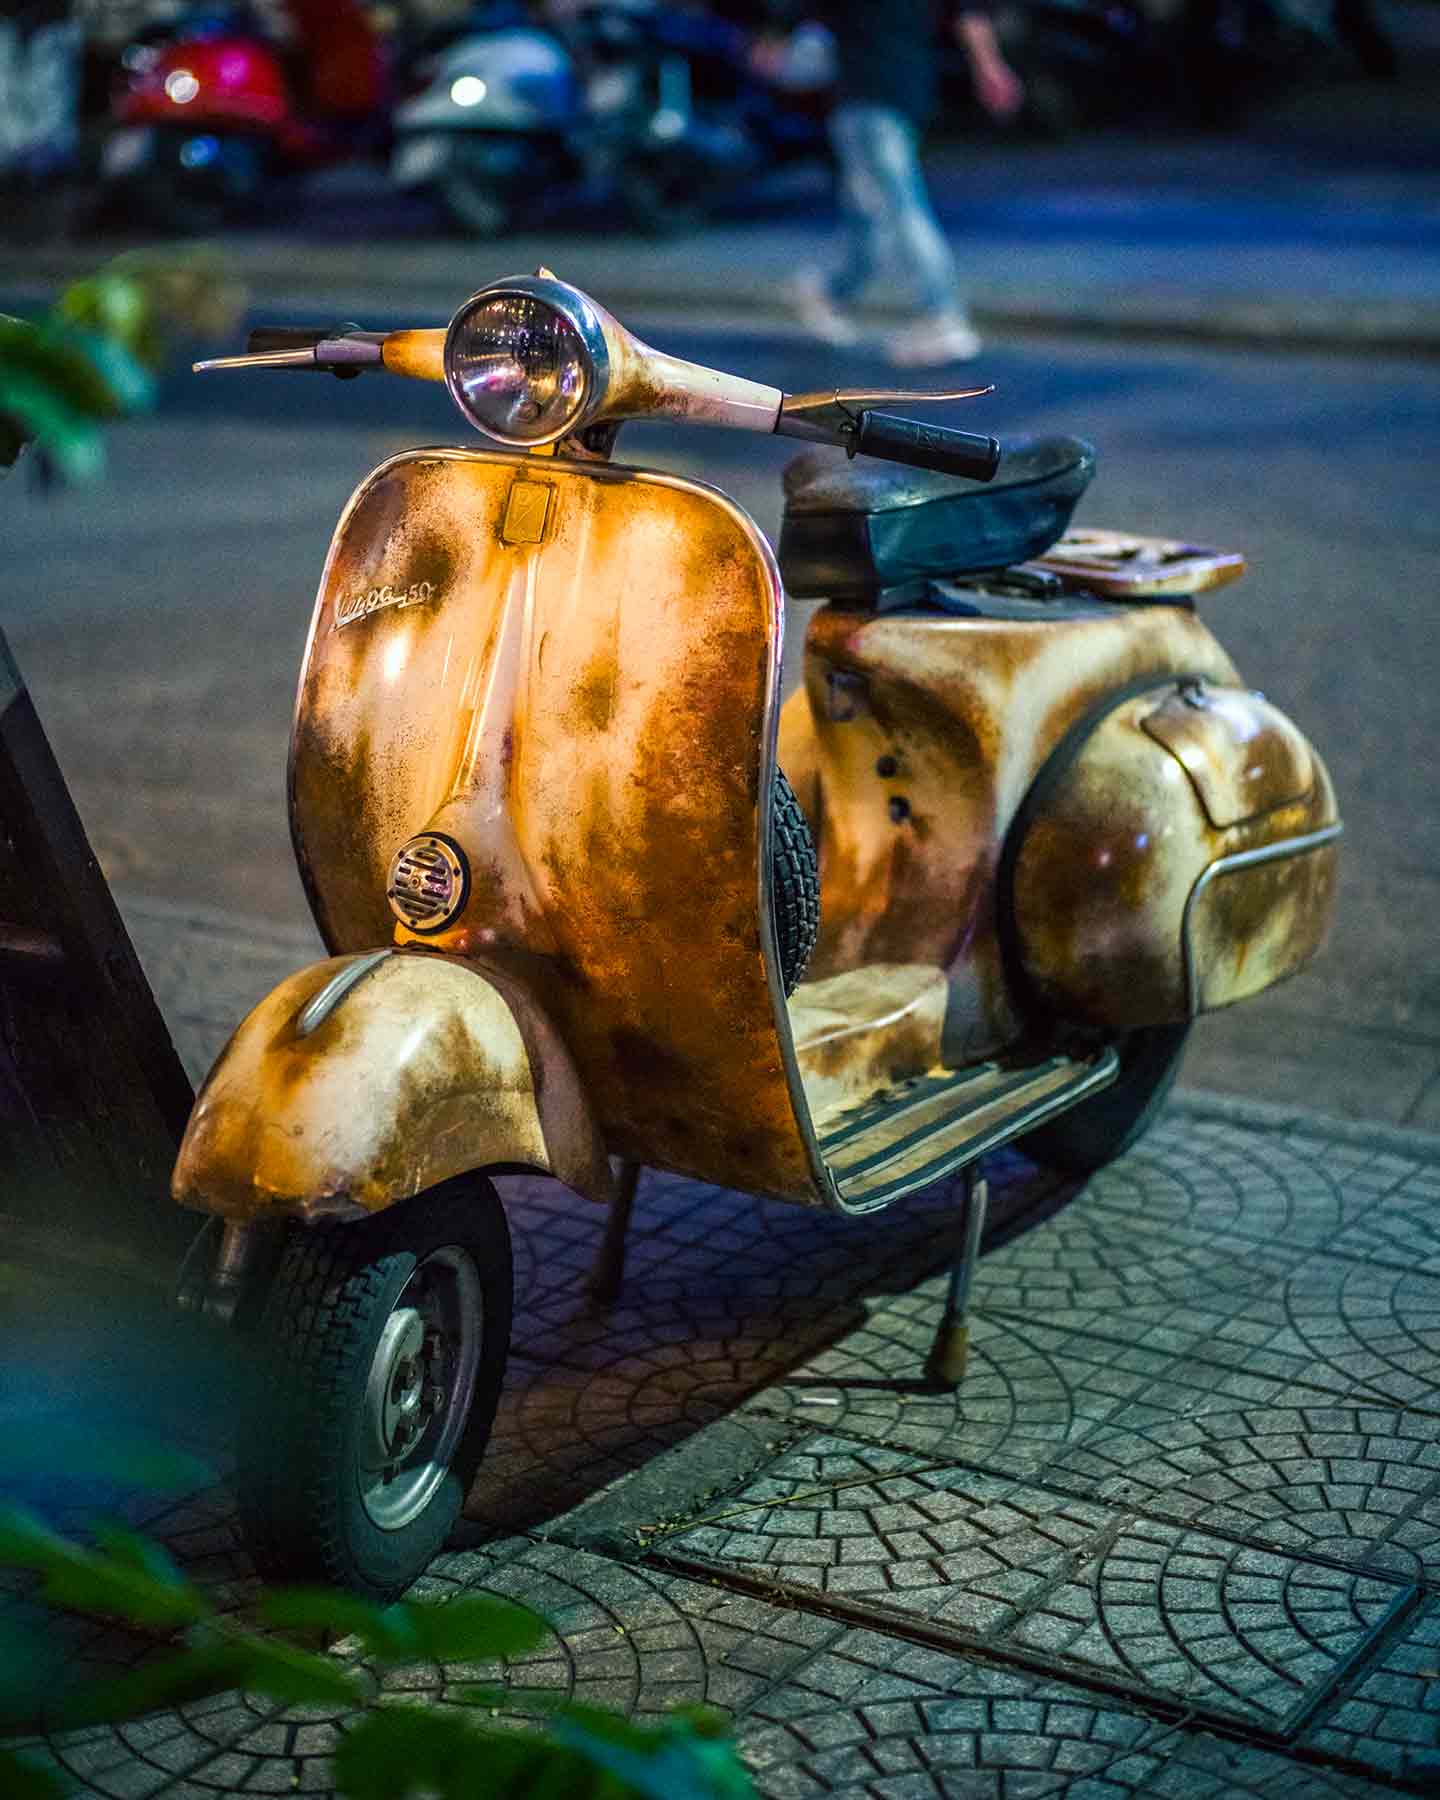 Vintage, rusted Vespa scooter parked in vibrant city night scene, embodying urban resilience and history.